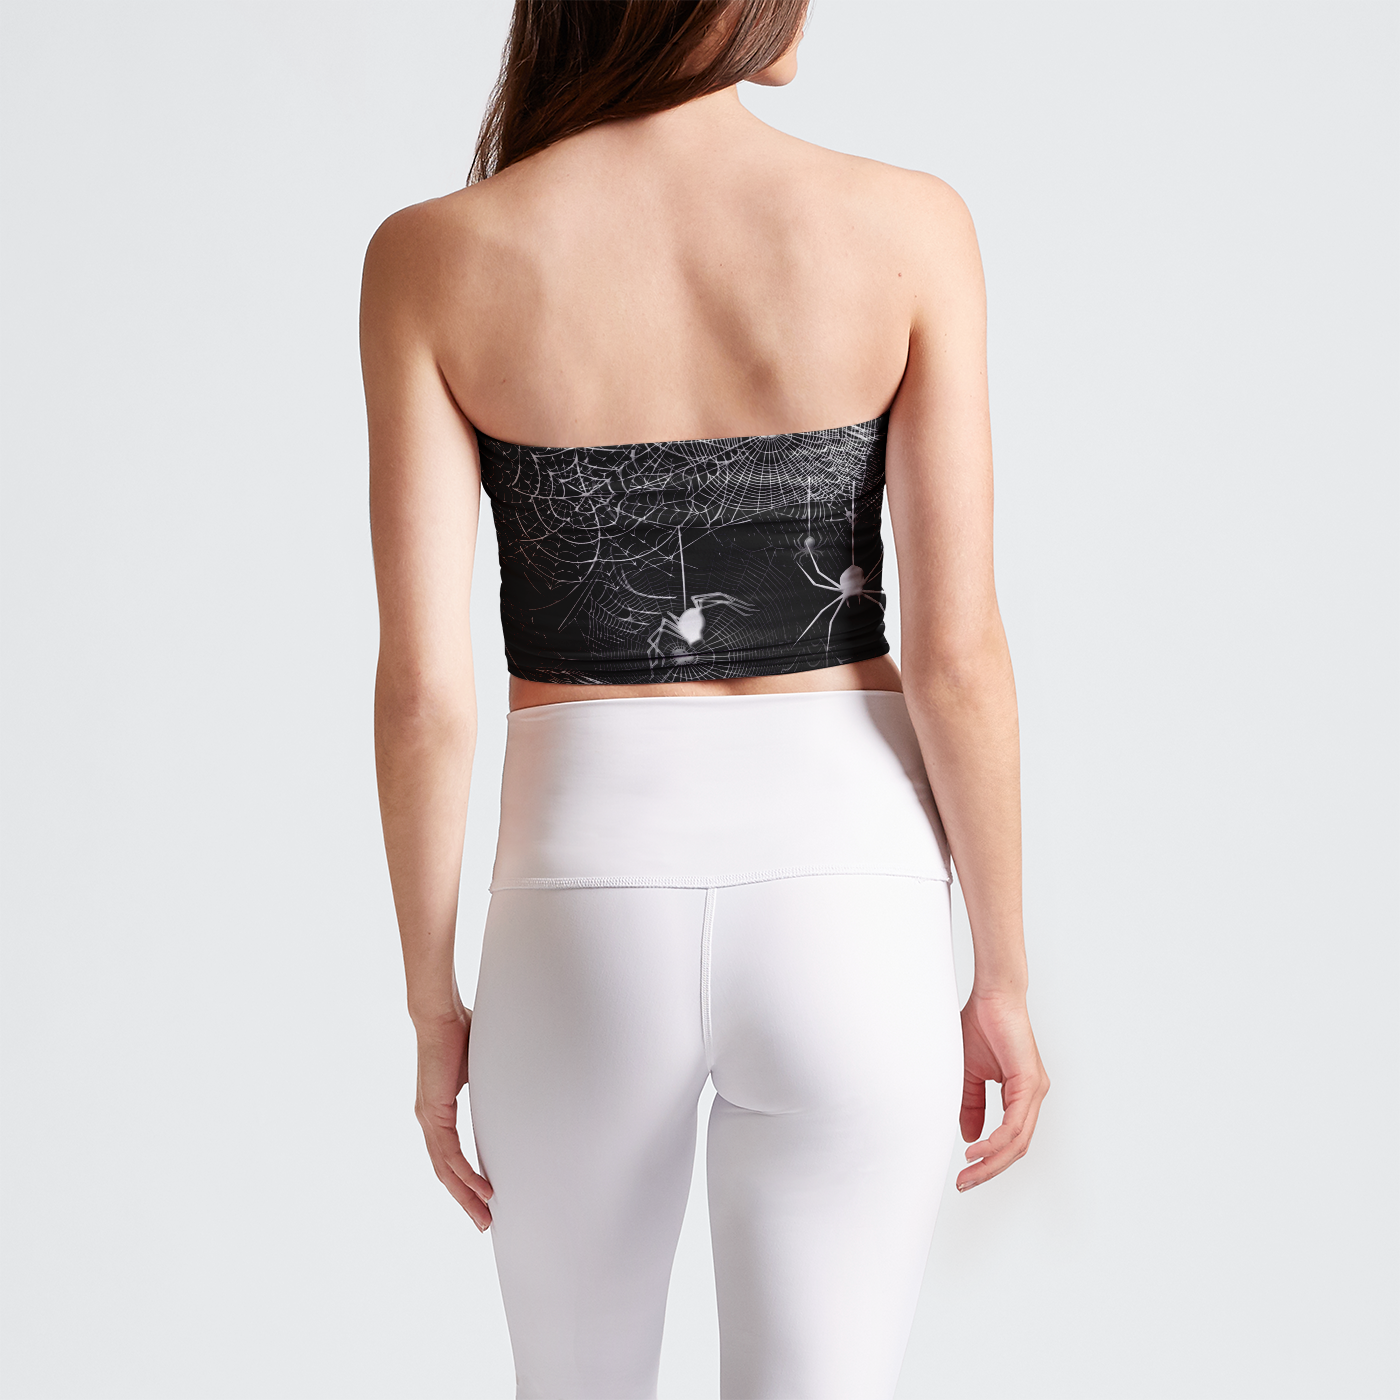 Black and White Spider Webs Tube Top